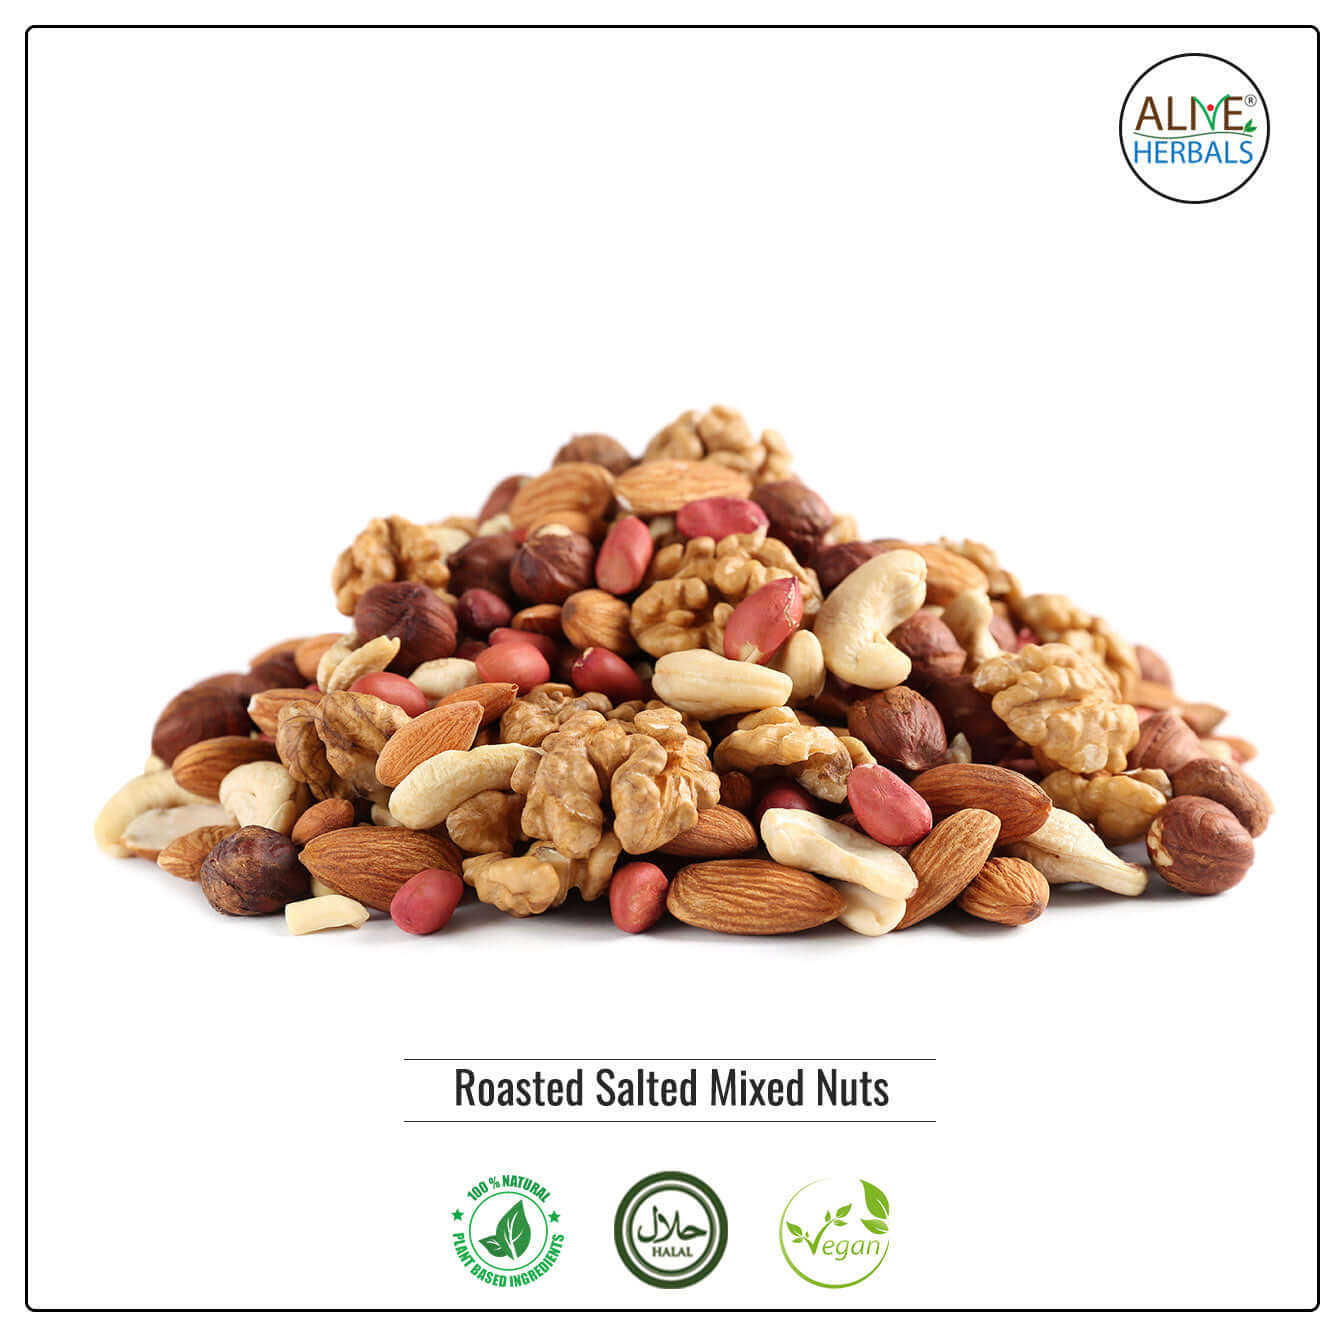 Mix Nuts (Roasted Salted) - Buy at Natural Food Store | Alive Herbals.